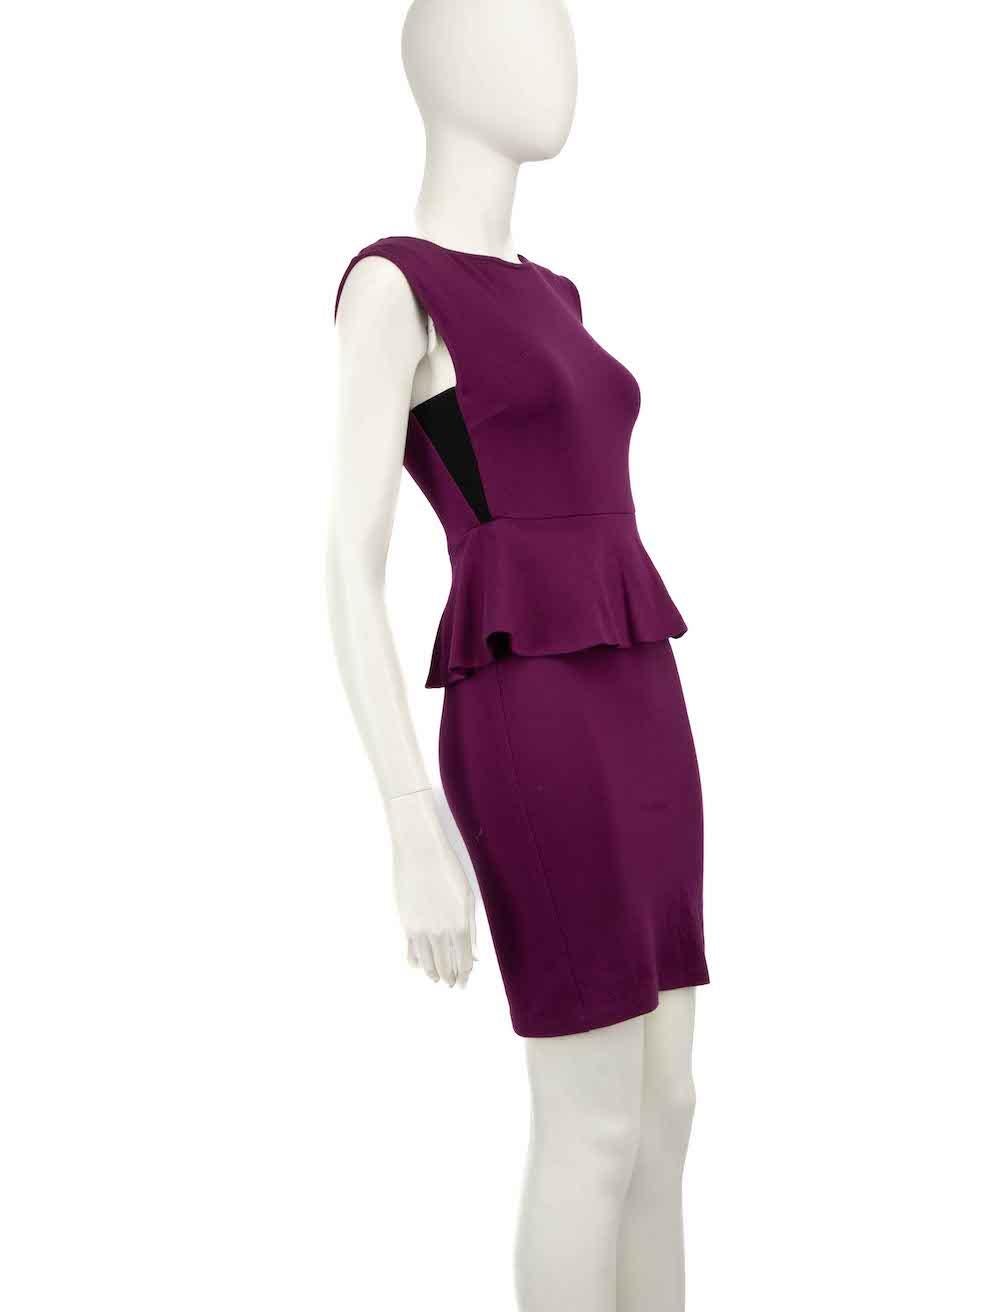 CONDITION is Good. Minor wear to dress is evident. Light wear to the stitching at the hem where a number of plucks and pulls are found on this used Alice + Olivia designer resale item.
 
 
 
 Details
 
 
 Purple
 
 Rayon
 
 Peplum dress
 
 Knee